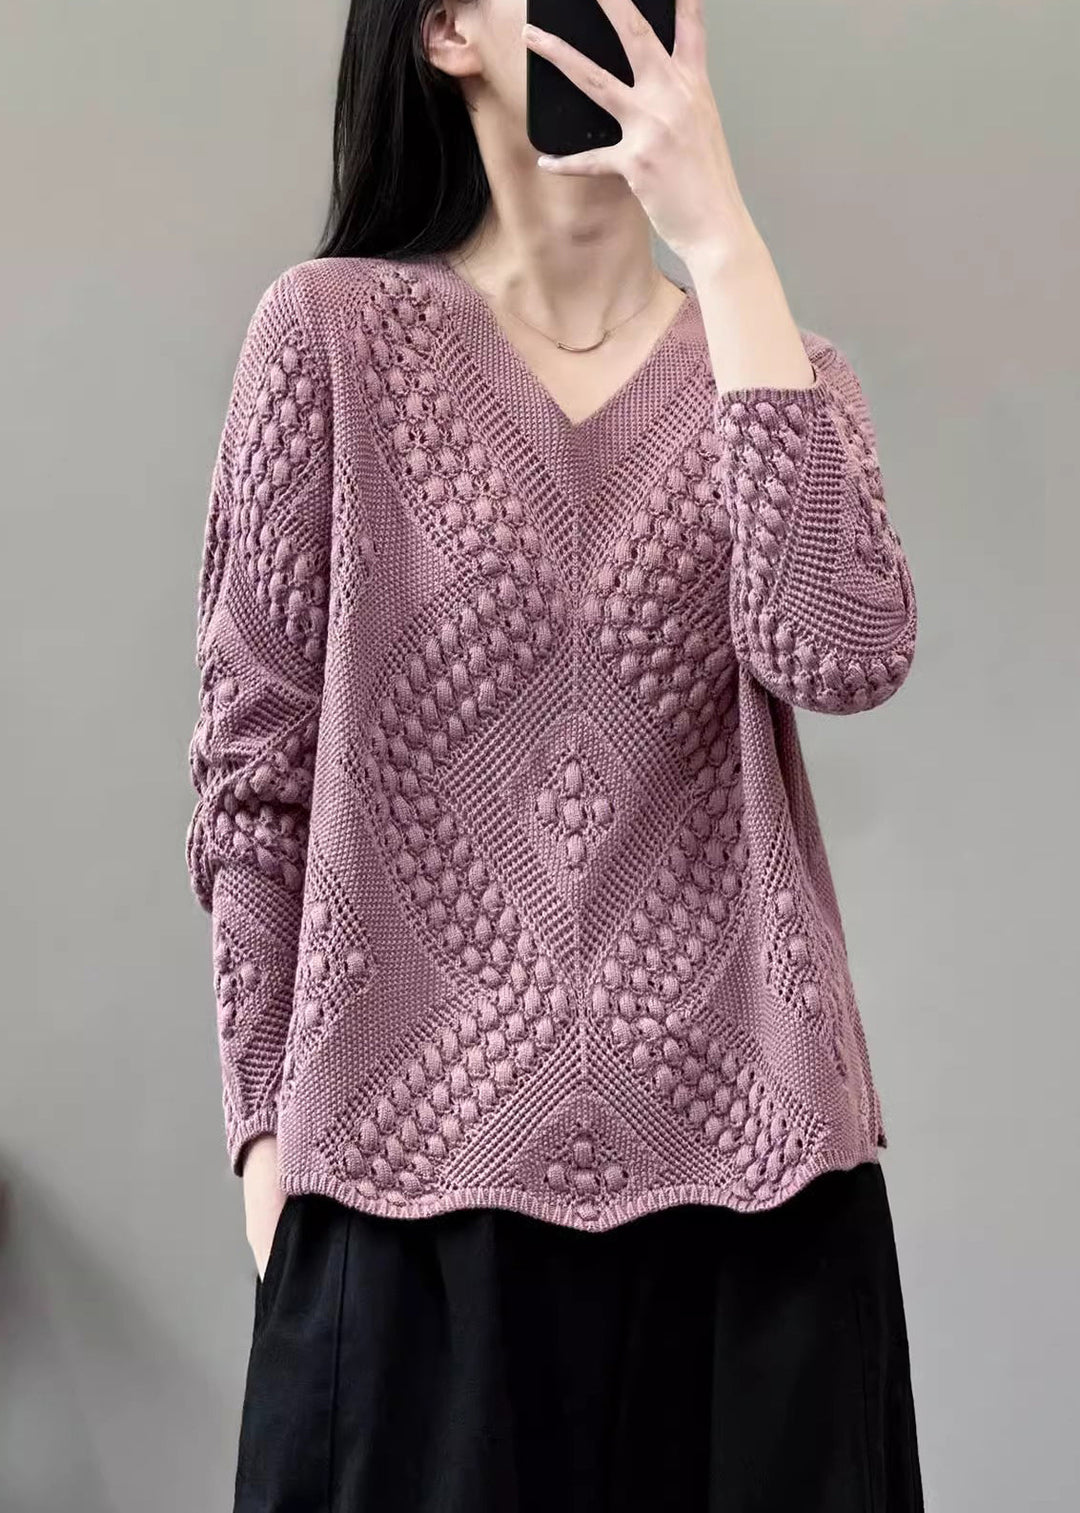 Simple Red Solid V Neck Cotton Knit Sweaters Long Sleeve